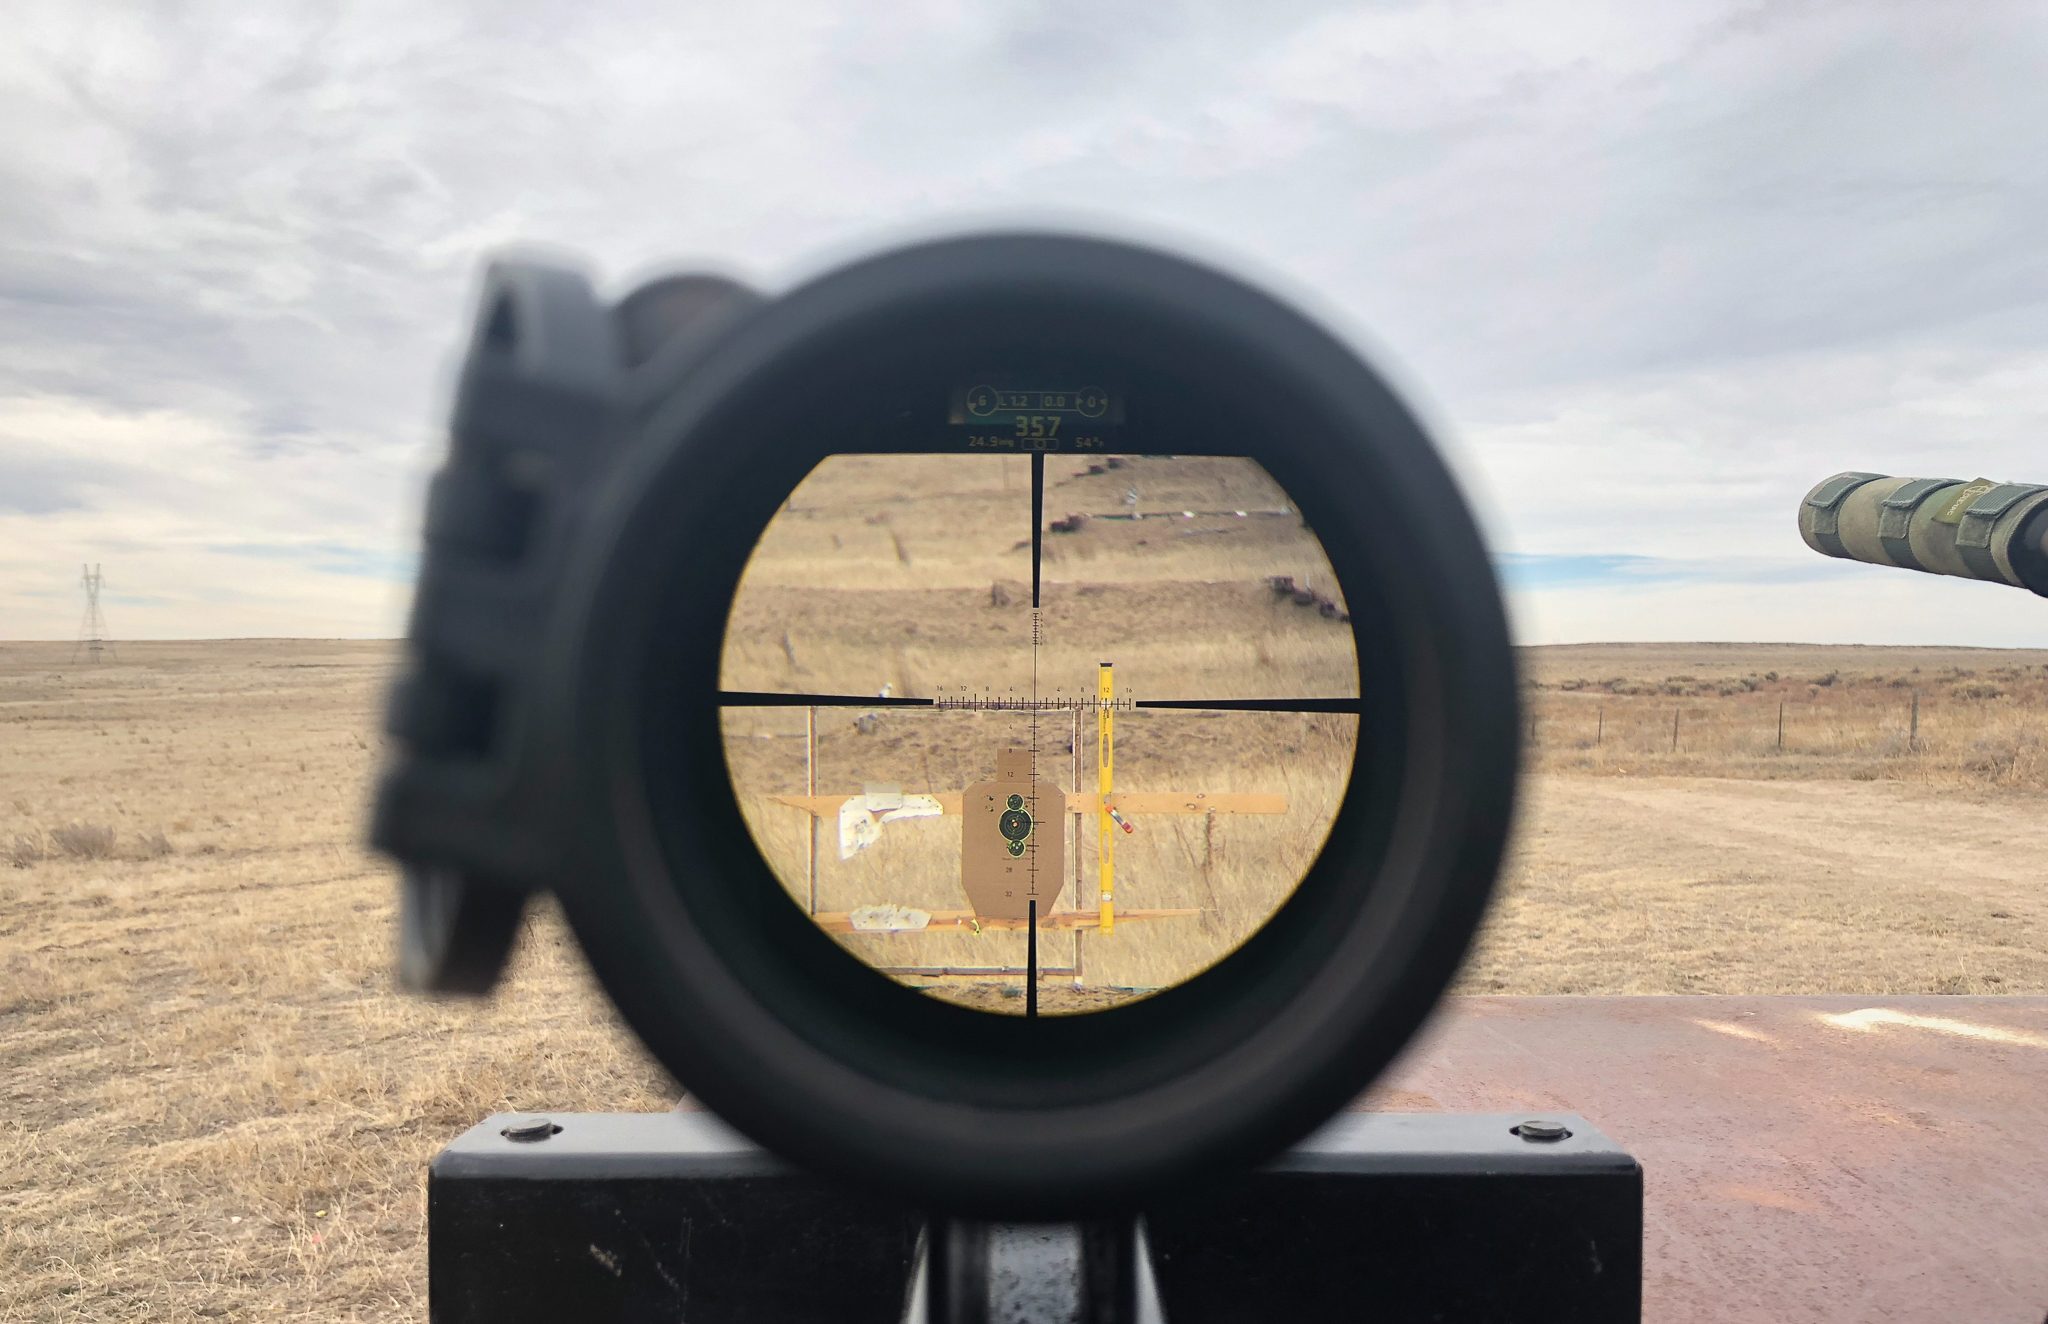 Reticle options these days are as diverse as ammo options, and many are designed for specialized disciplines of shooting. Like all other decisions you need to make while building a long-range setup, figure out what works best for you and then get to know it intimately.